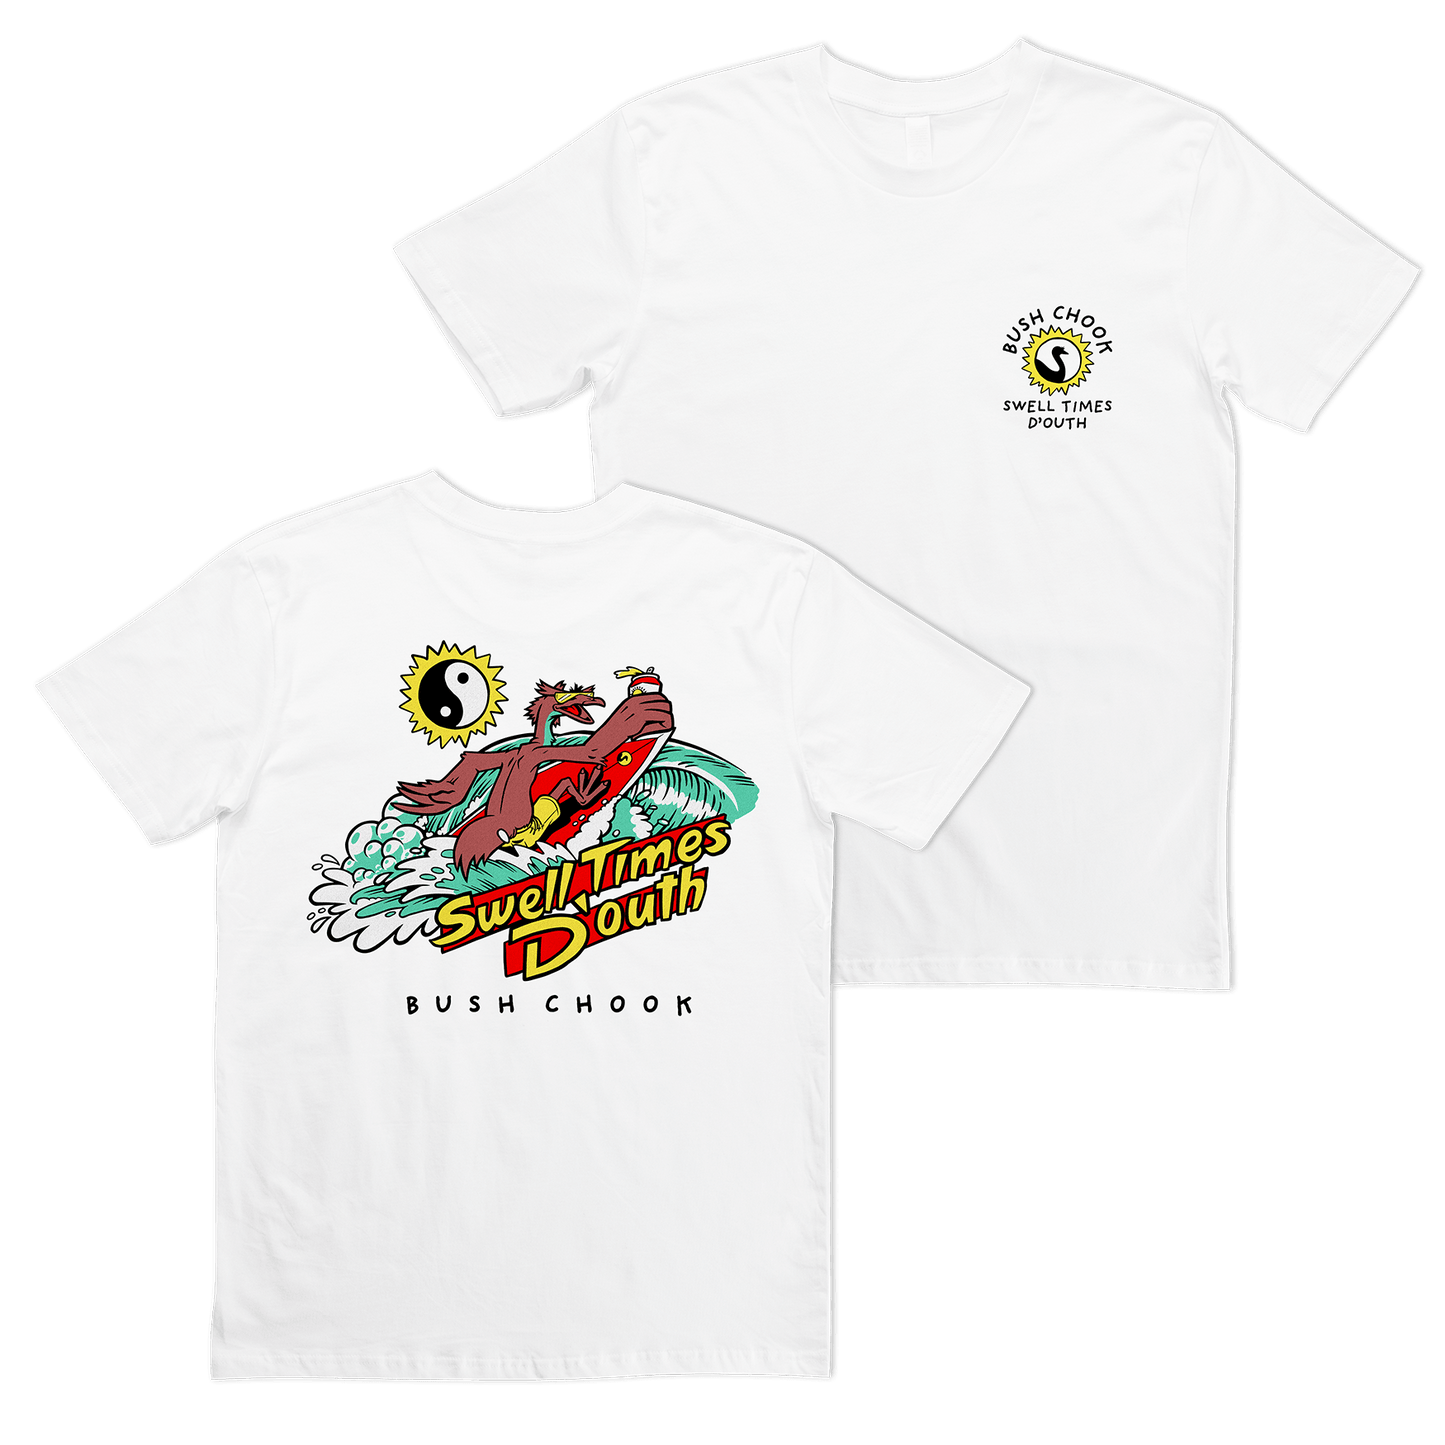 Swell Time D'outh Tee White T-Shirt Bush Chook